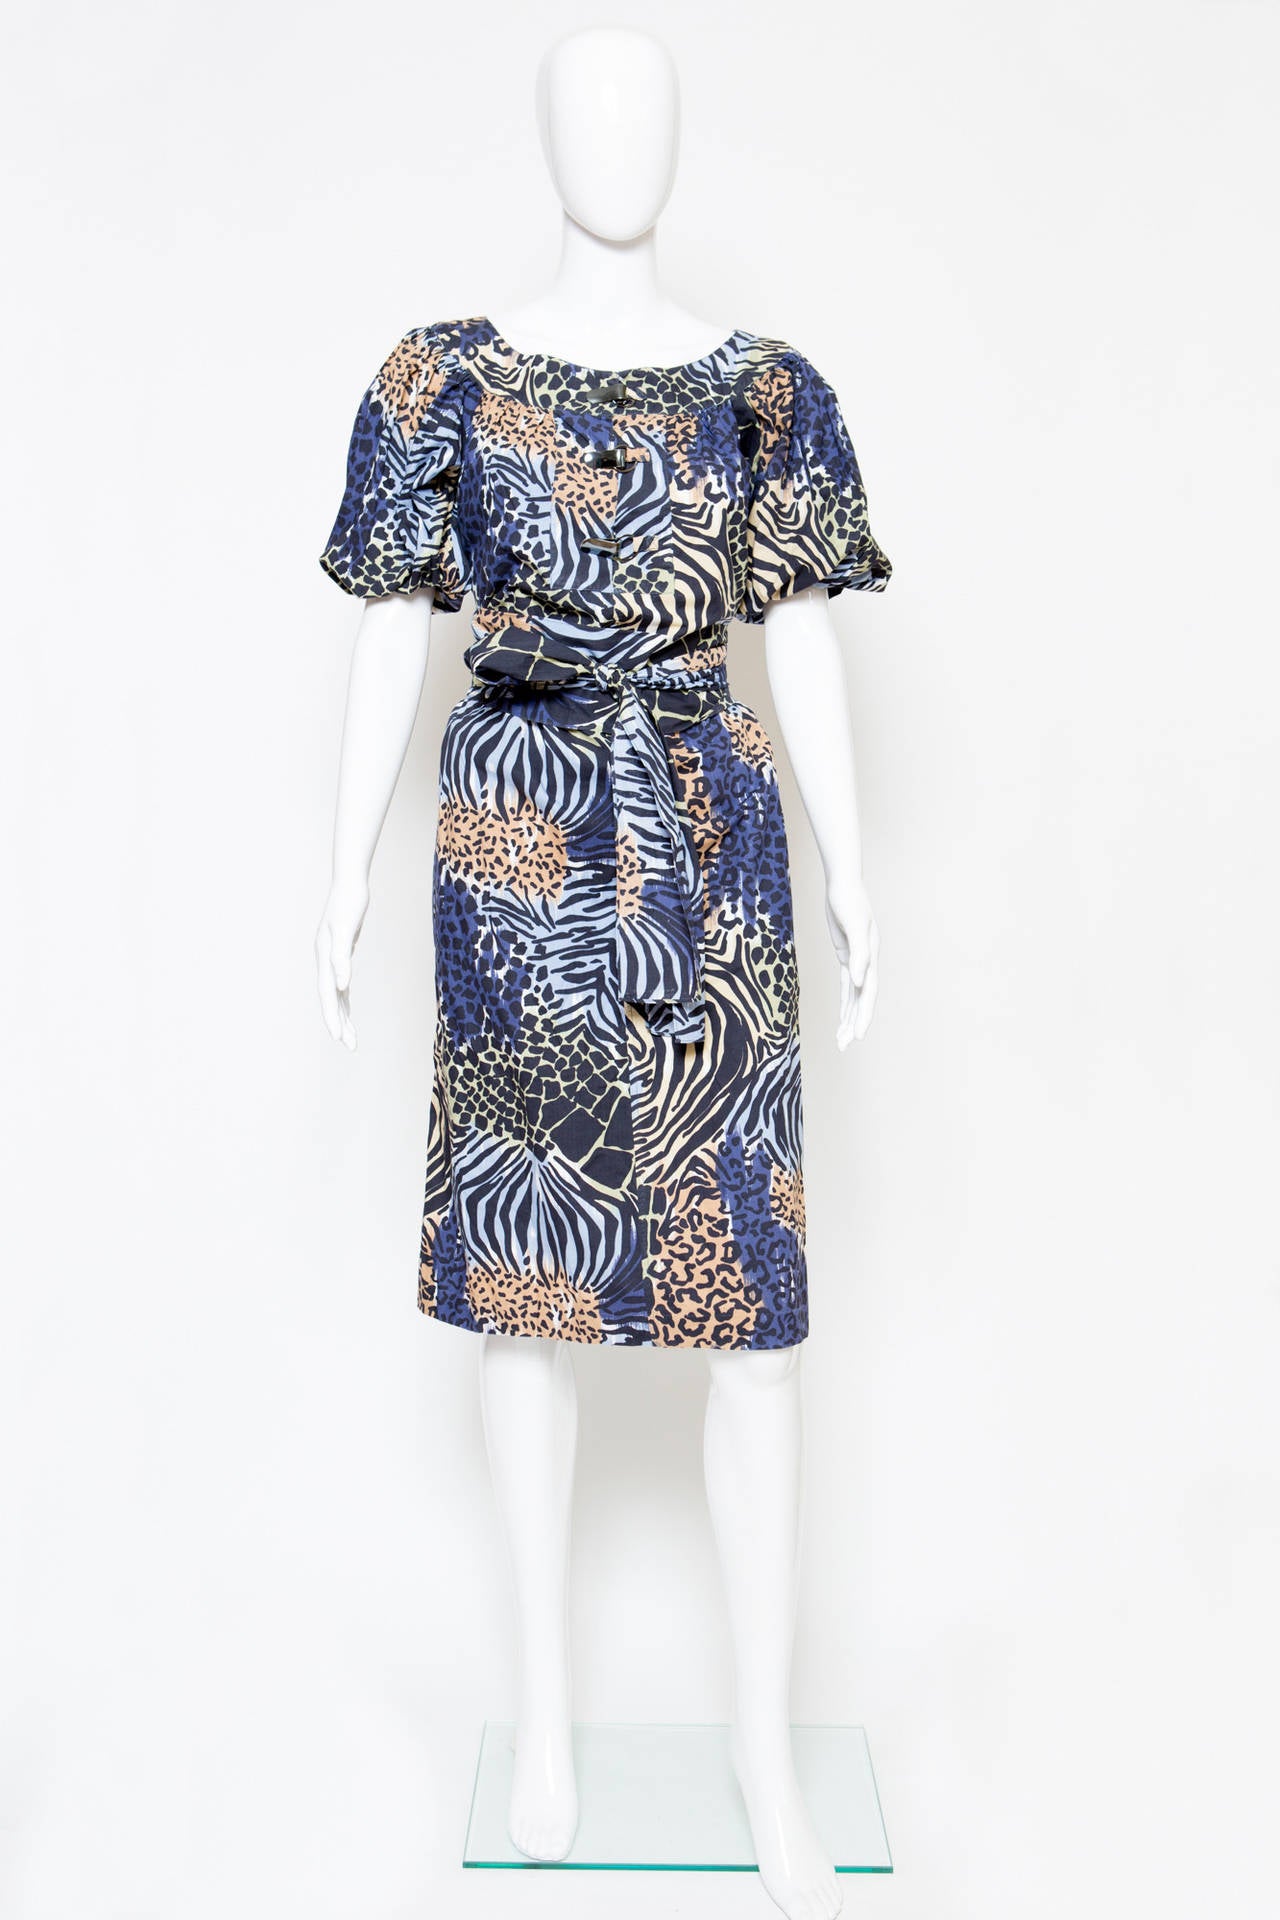 1980s  Yves Saint Laurent printed cotton dress featuring an elasticated short sleeves, side seams pockets, and a separated belt in self fabric.
Estimated size: 38fr